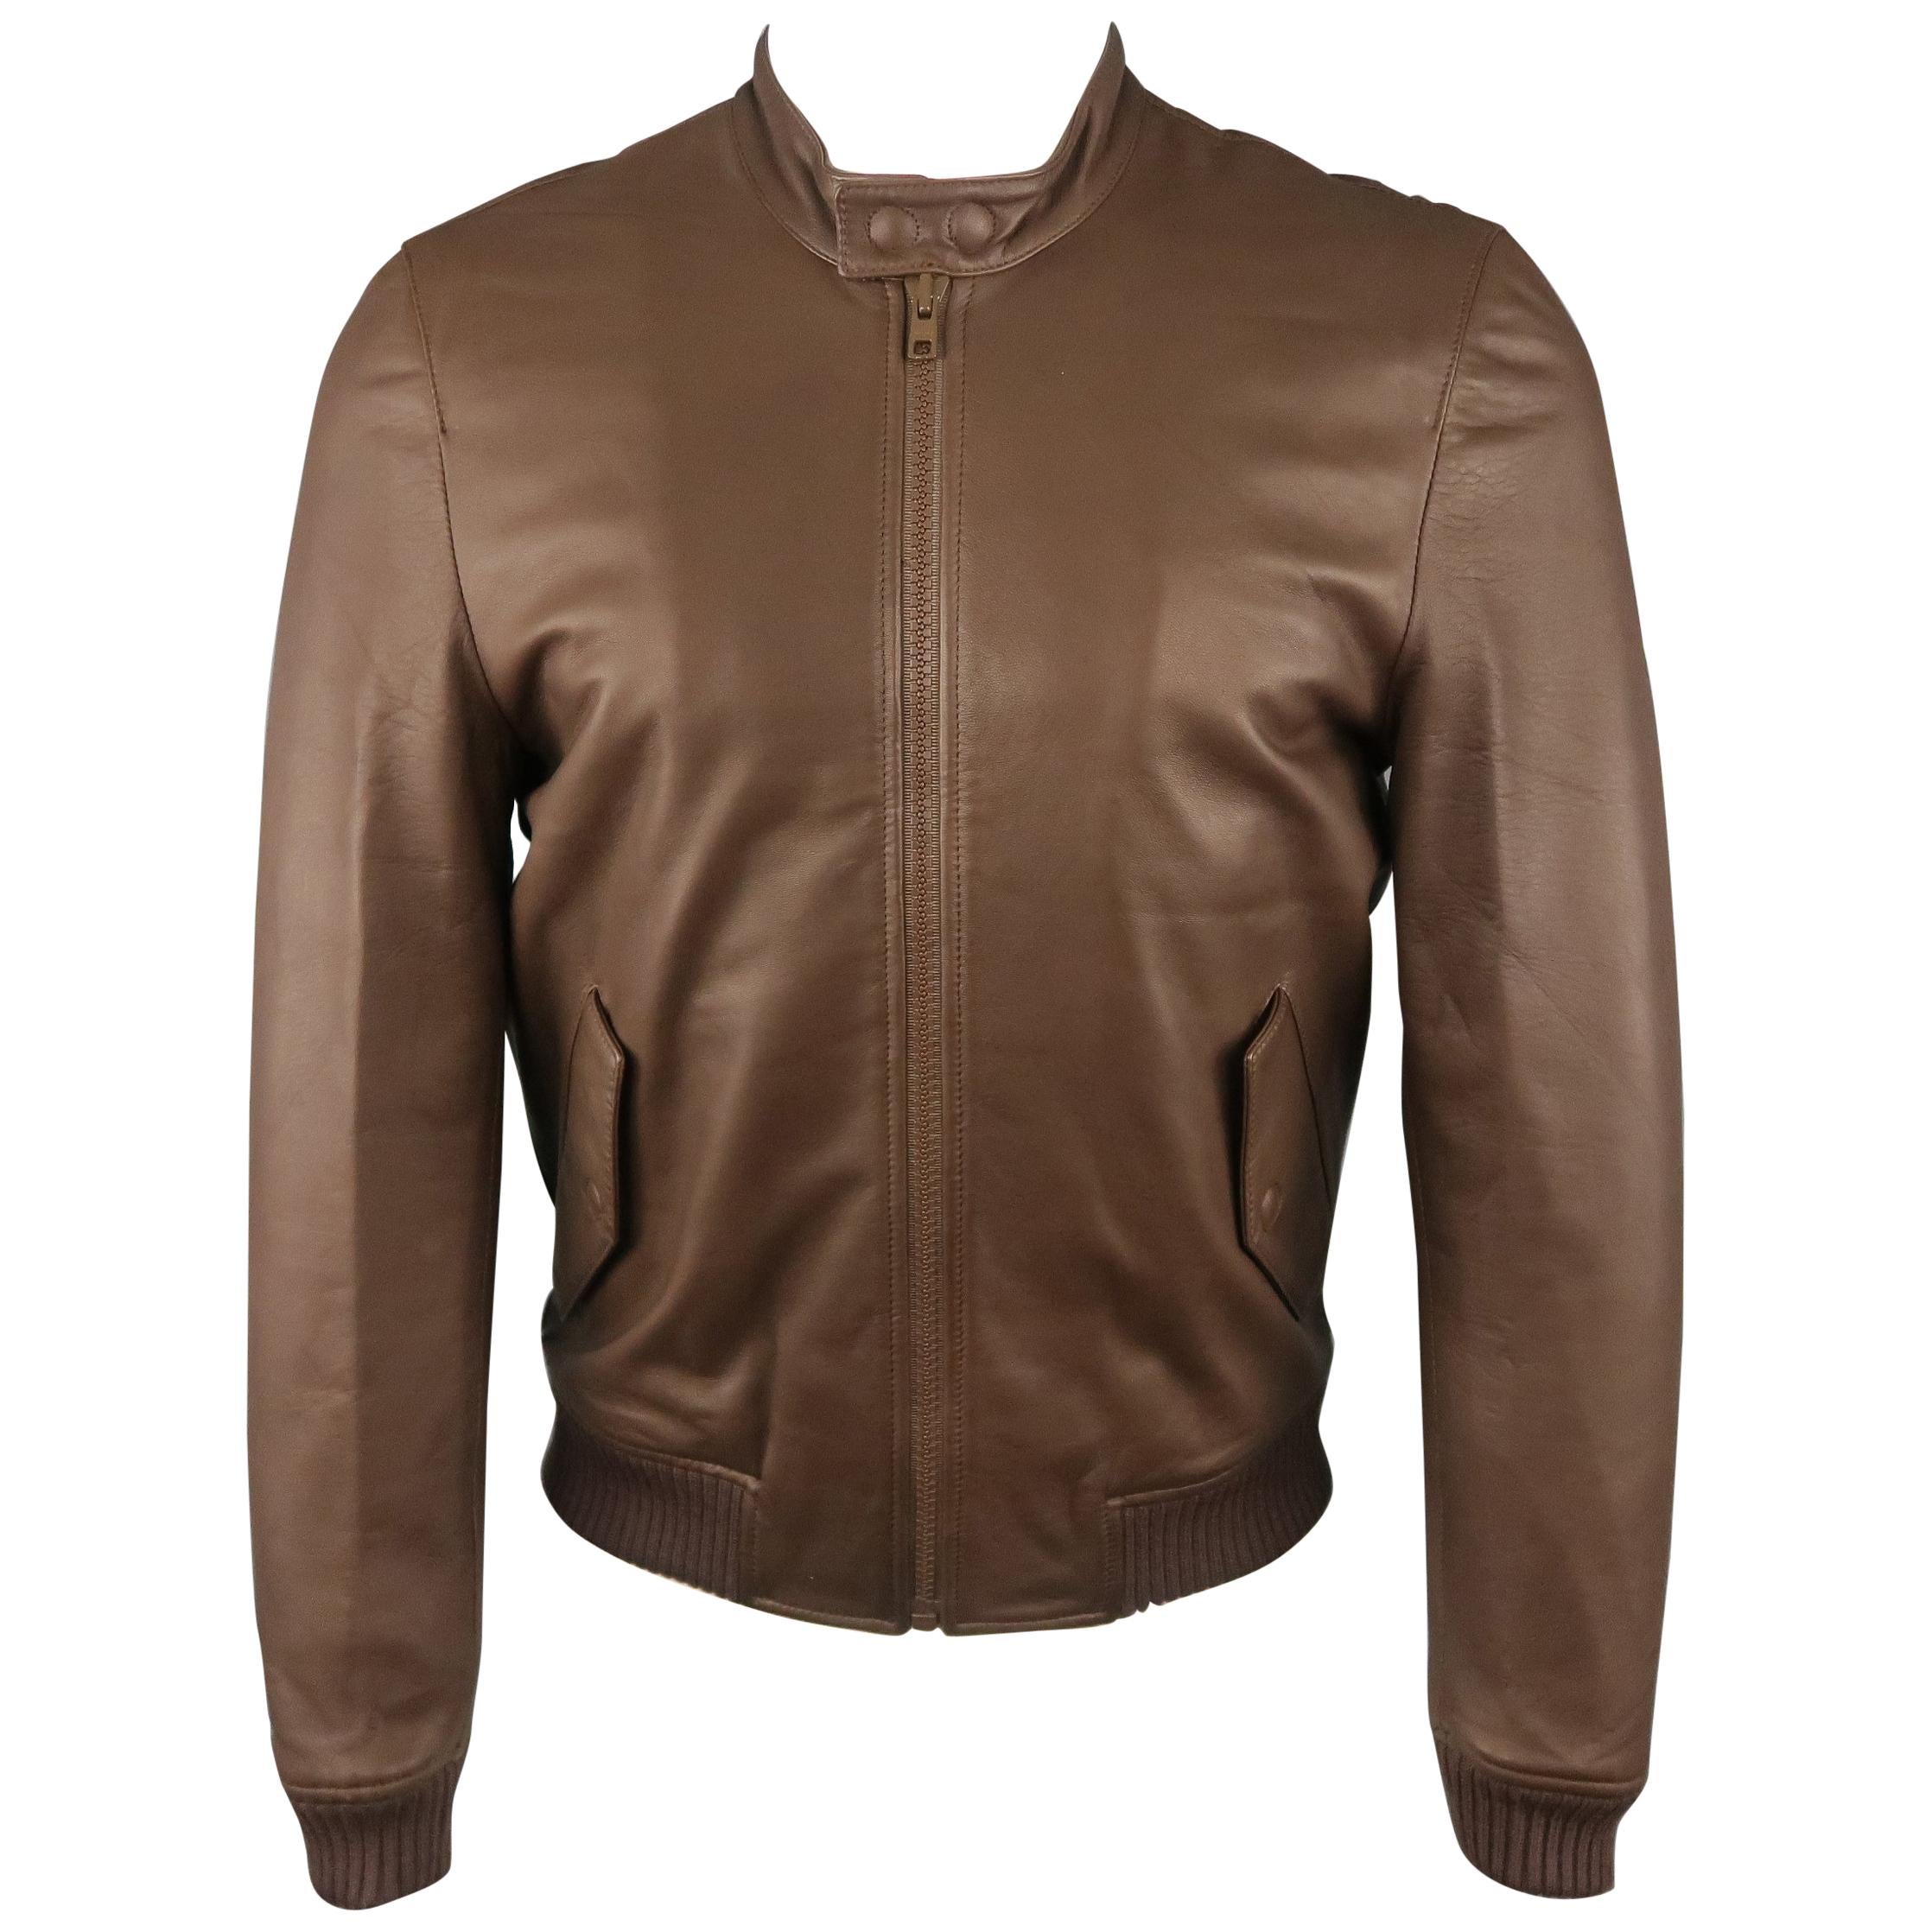 Men's BAND OF OUTSIDERS S Brown Leather Bomber Jacket NWT